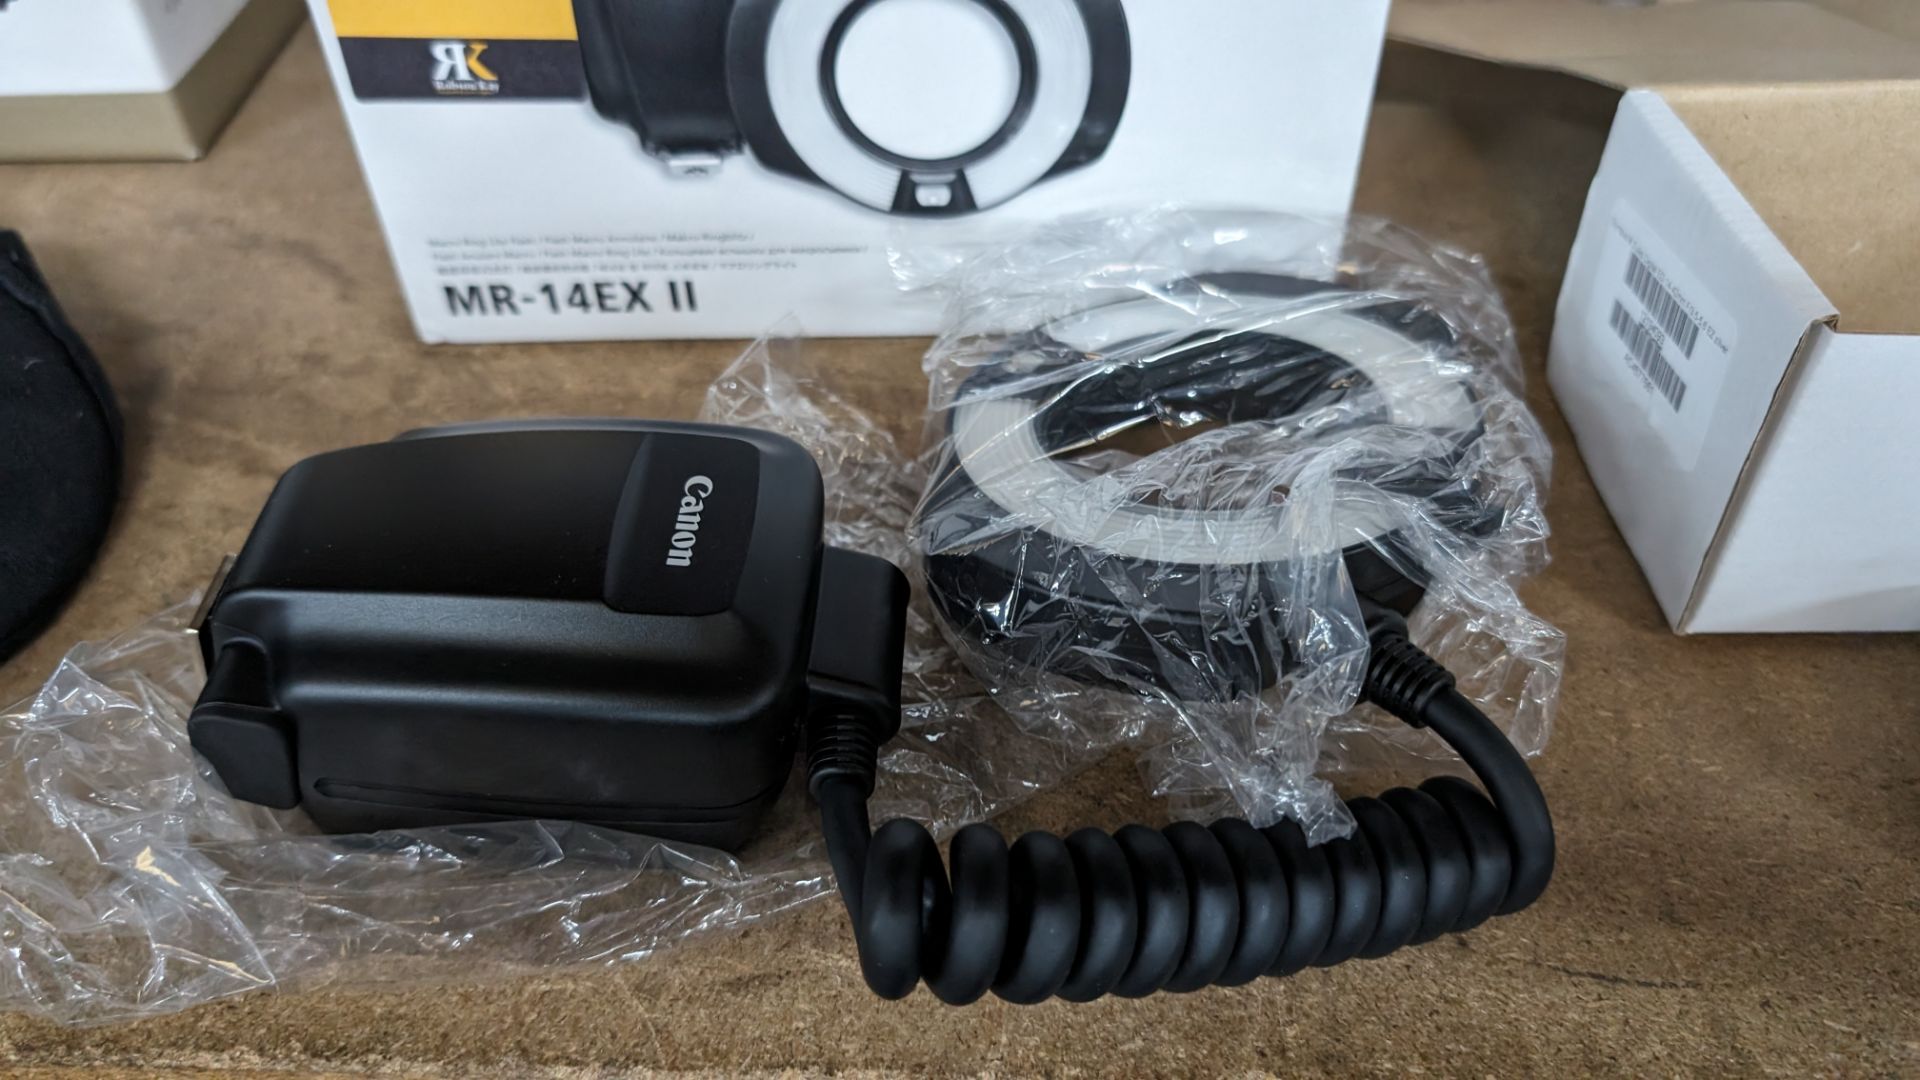 Canon MR-14EX II macro ring light flash. Includes soft carry case - Image 3 of 7